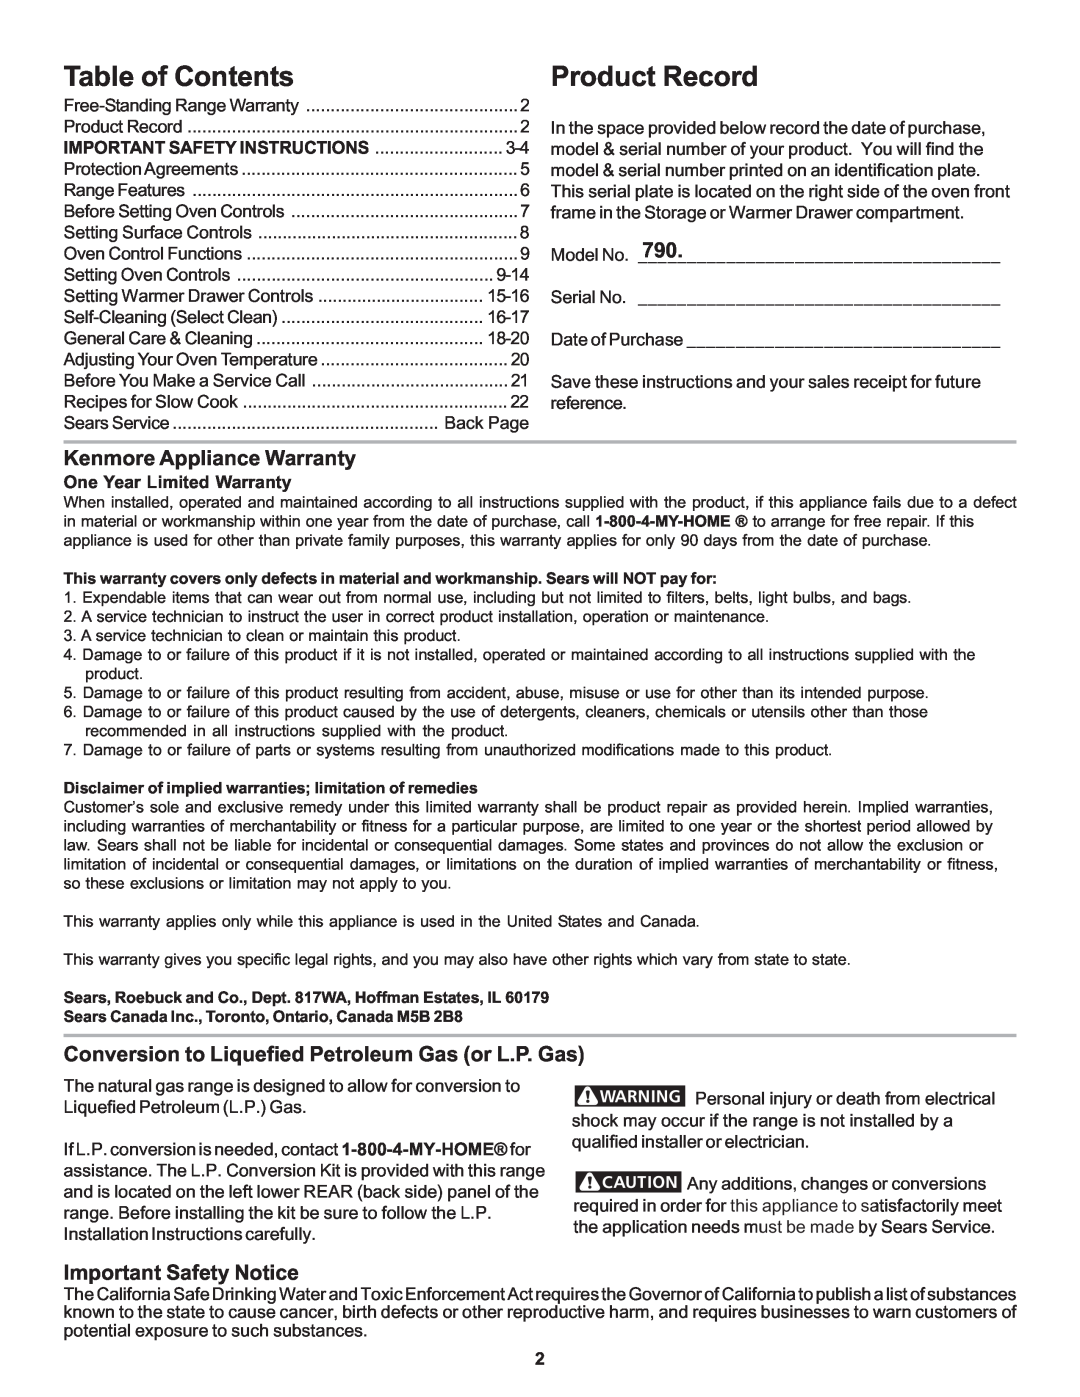 Kenmore 790 manual Kenmore Appliance Warranty, Conversion to Liquefied Petroleum Gas or L.P. Gas, Important Safety Notice 